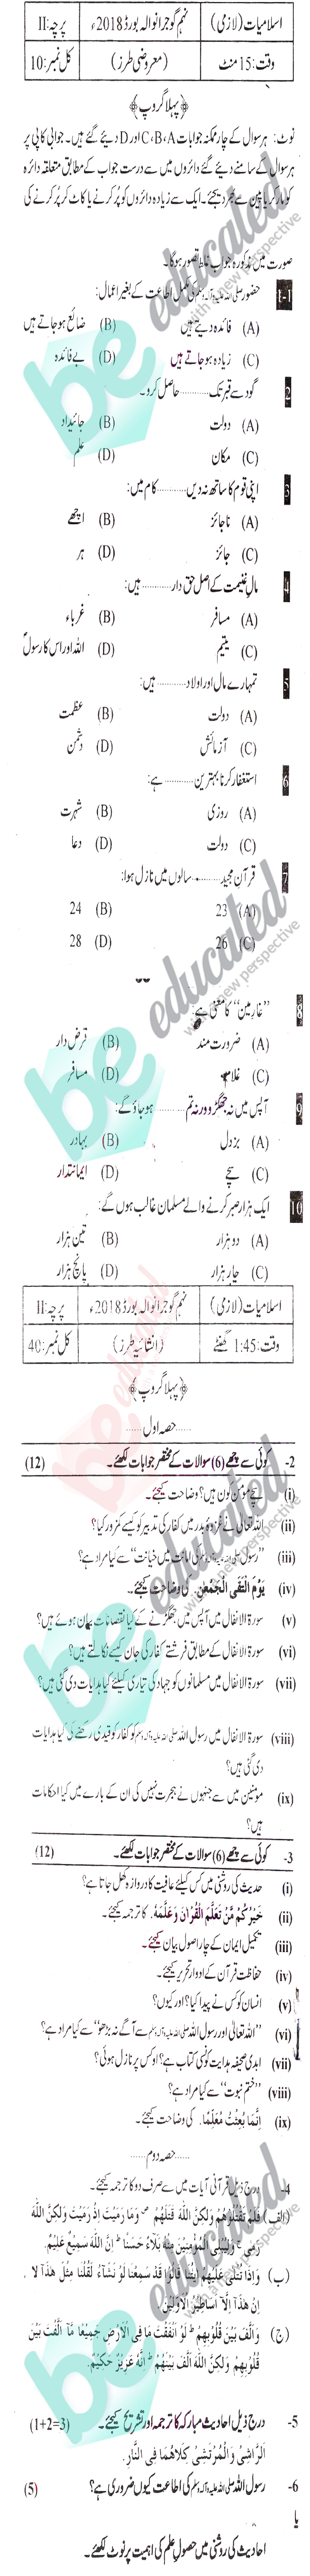 Islamiat (Compulsory) 9th class Past Paper Group 1 BISE Gujranwala 2018